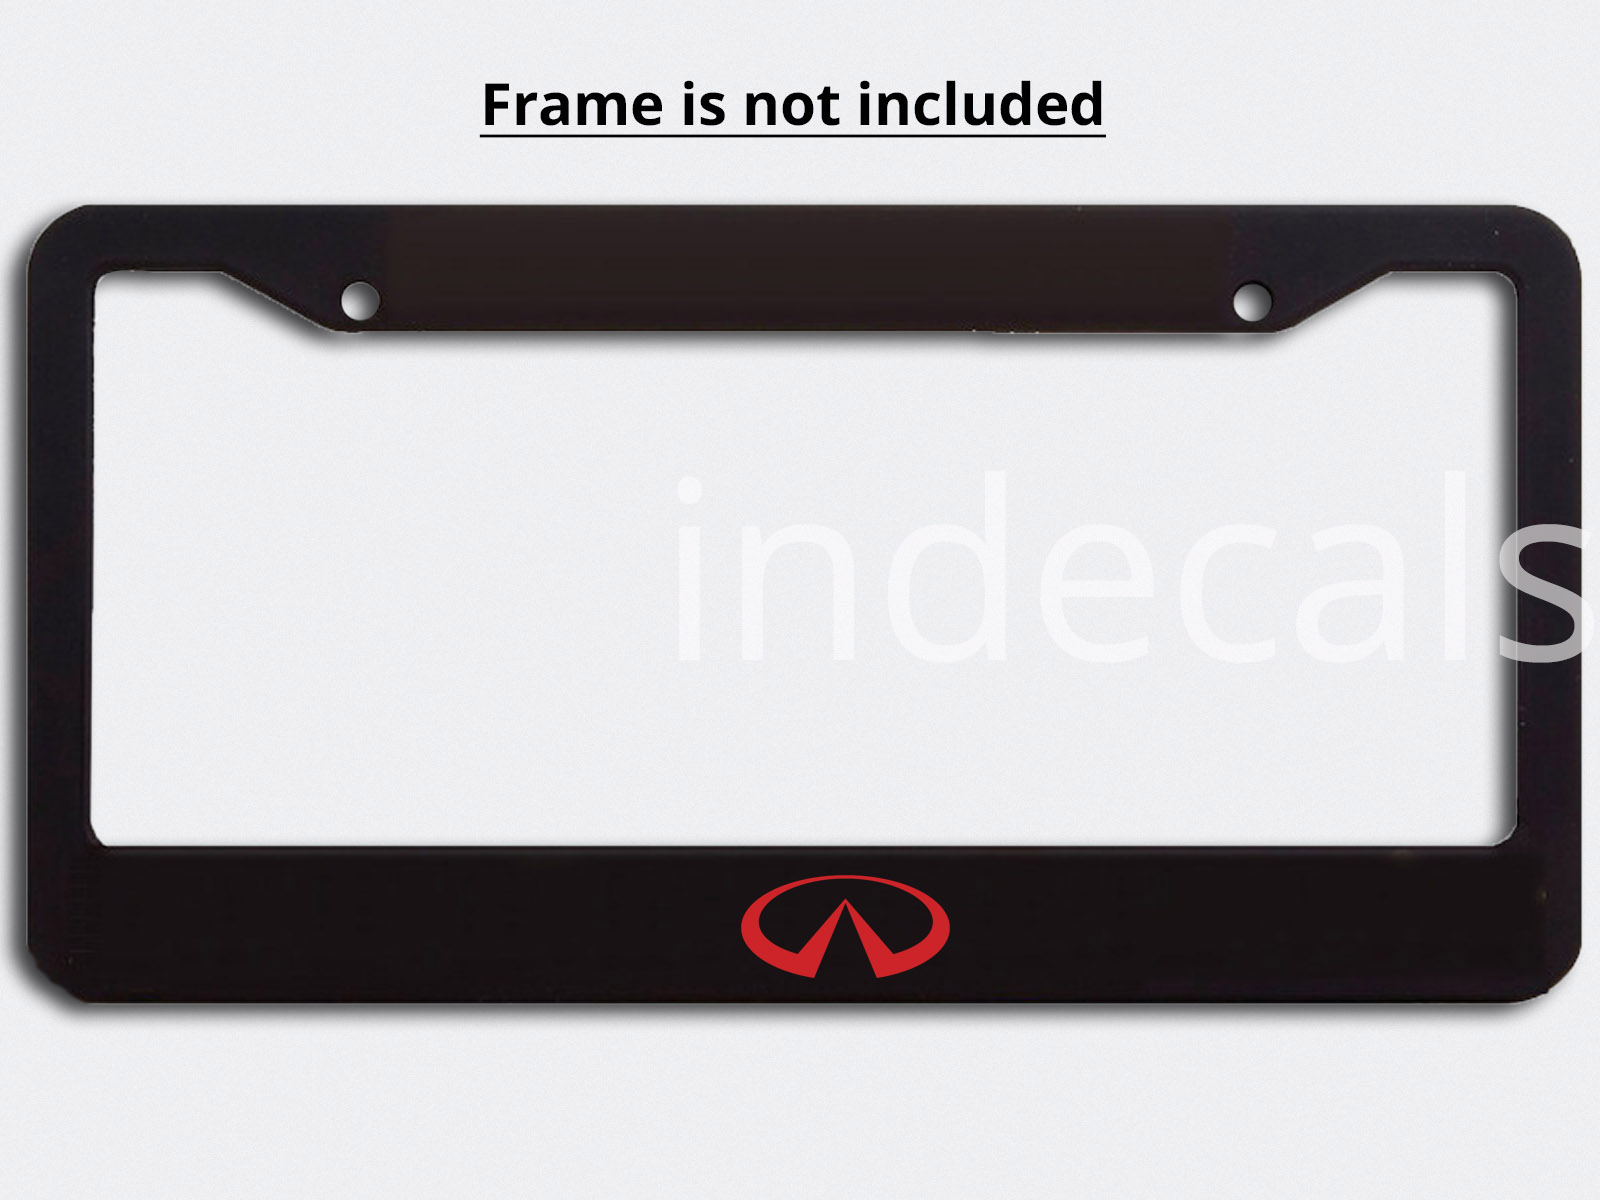 3 x Infiniti Stickers for License Plate Frame - Red